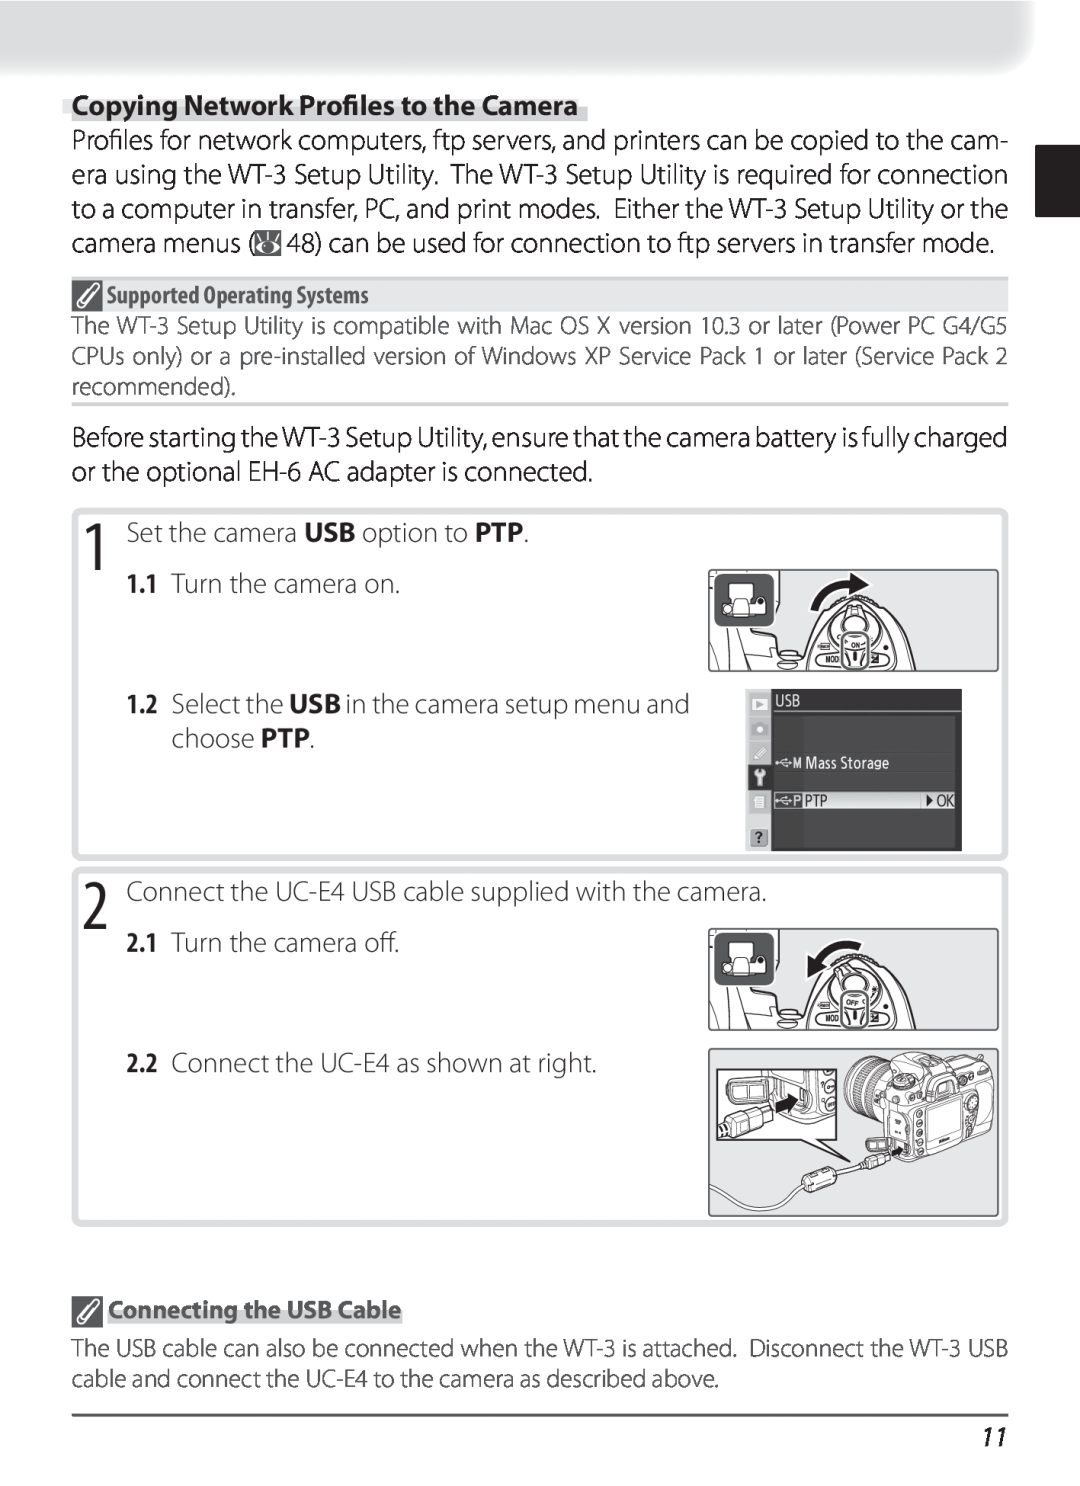 Nikon WT-3 user manual Copying Network Proﬁles to the Camera, Set the camera USB option to PTP 1.1 Turn the camera on 